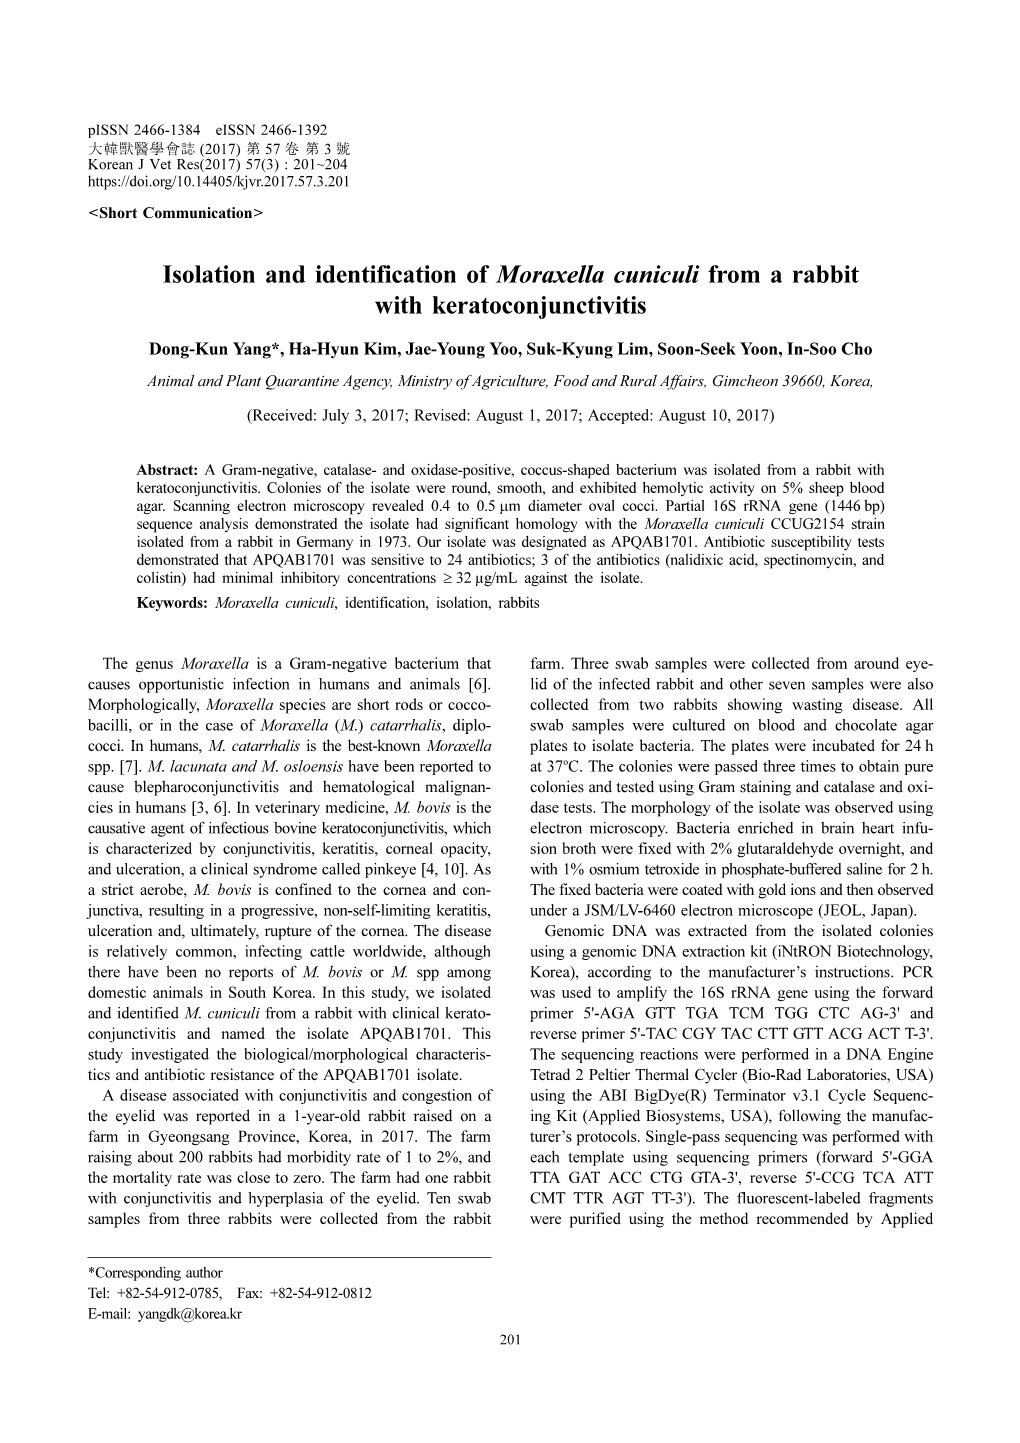 Isolation and Identification of Moraxella Cuniculi from a Rabbit with Keratoconjunctivitis